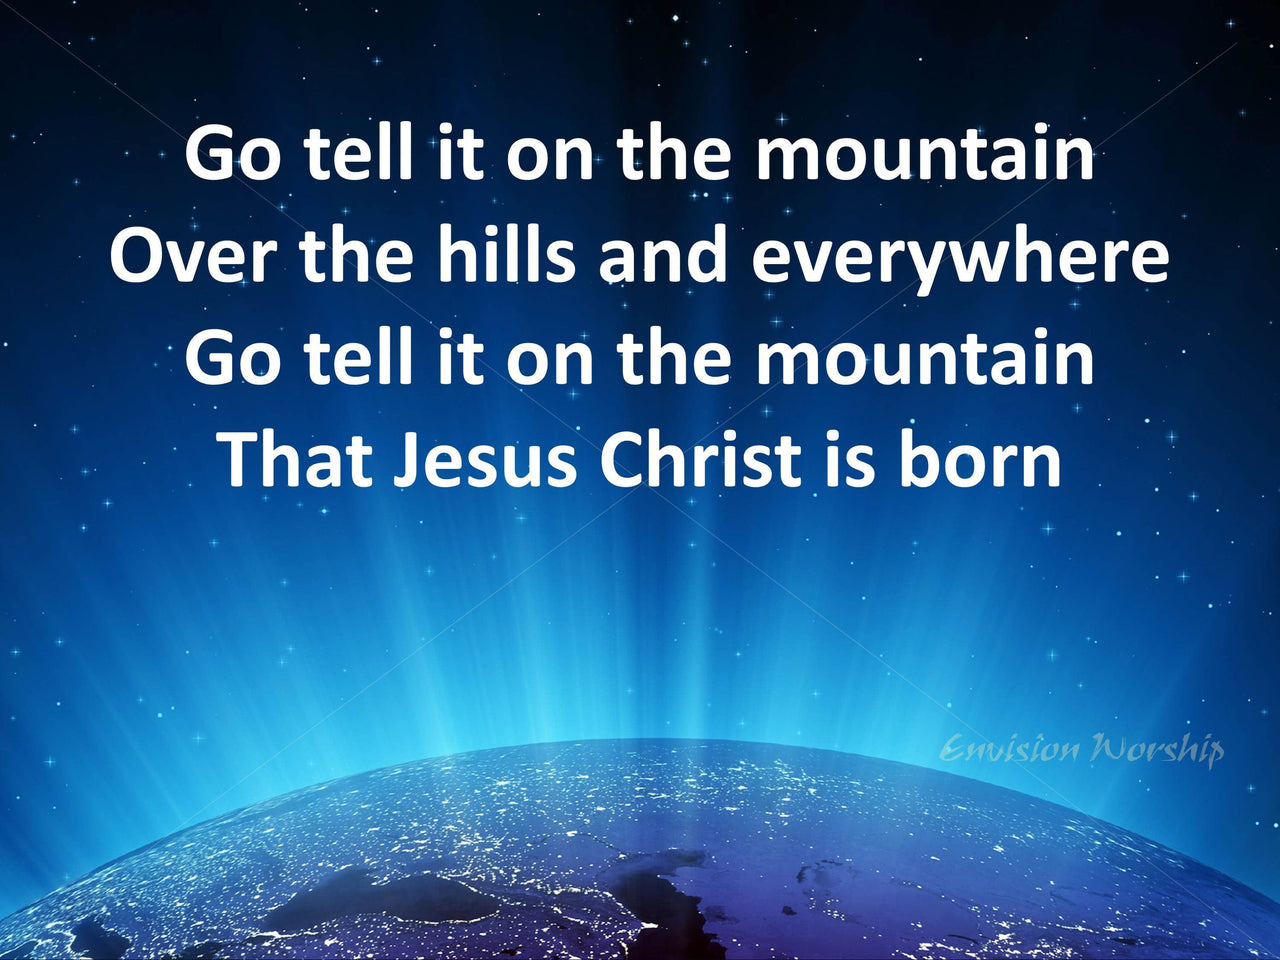 Go tell it on the mountain church PowerPoint template 